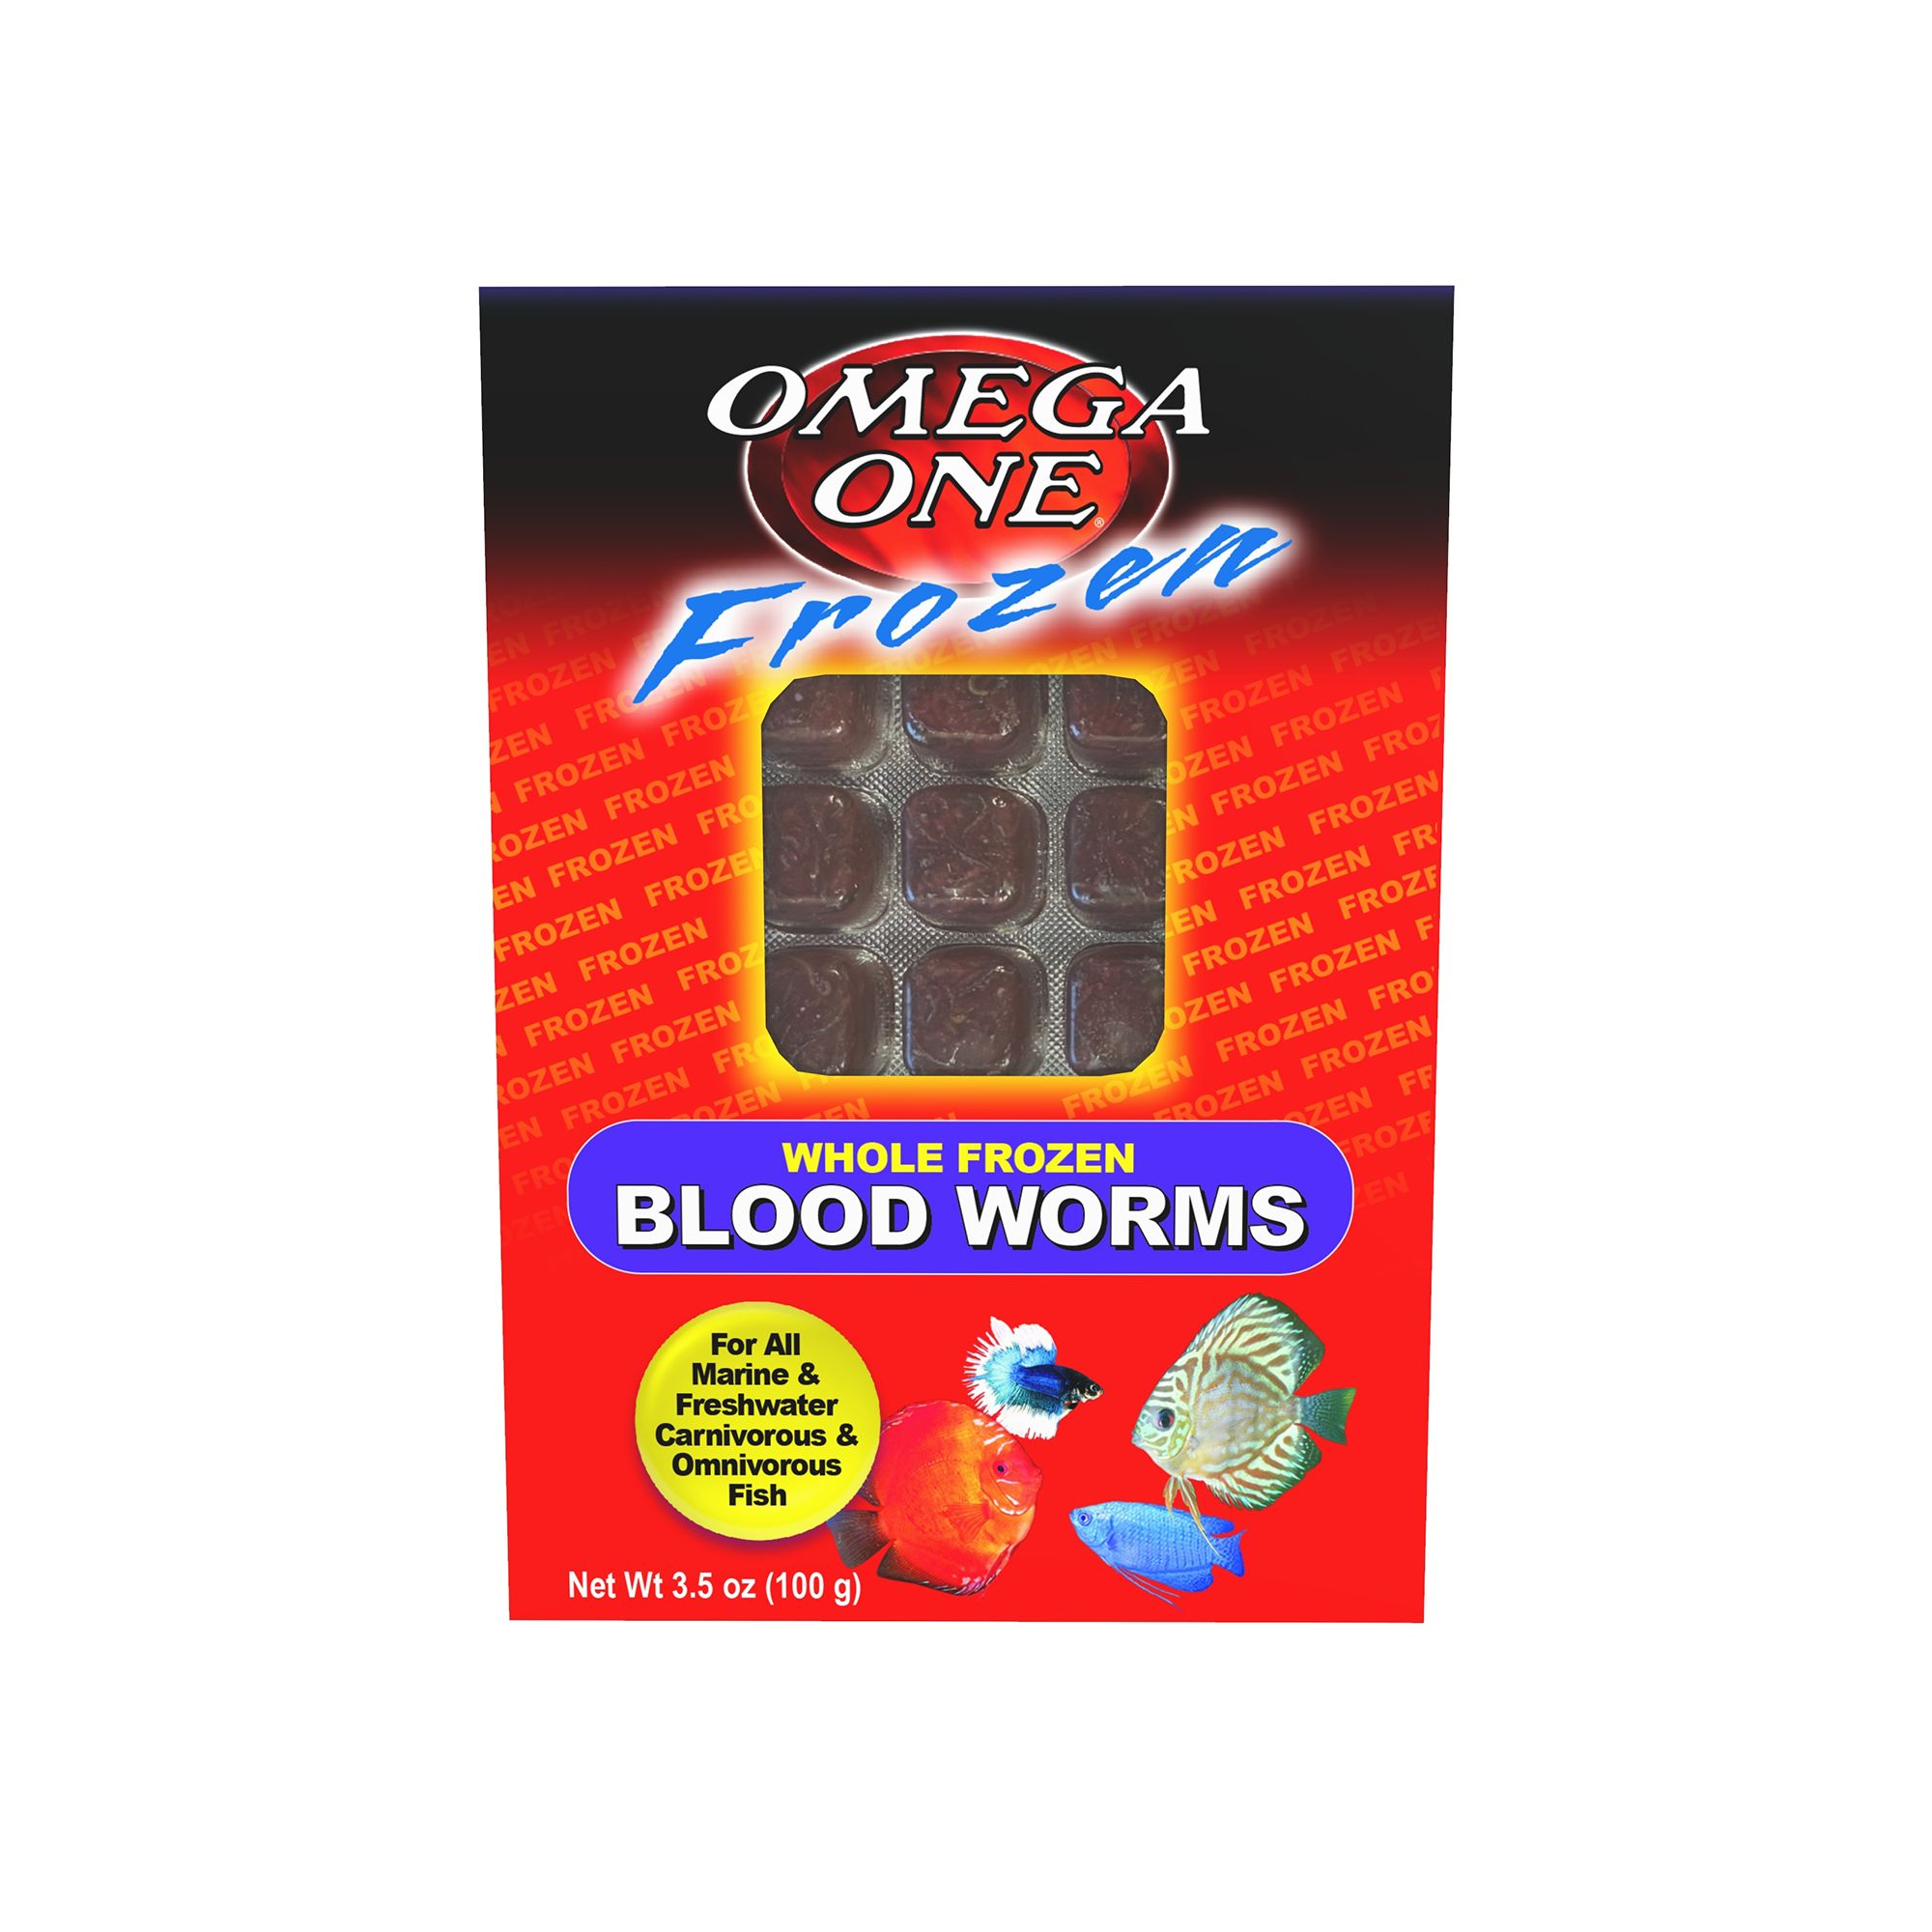 Omega™One Frozen Bloodworms, fish Food